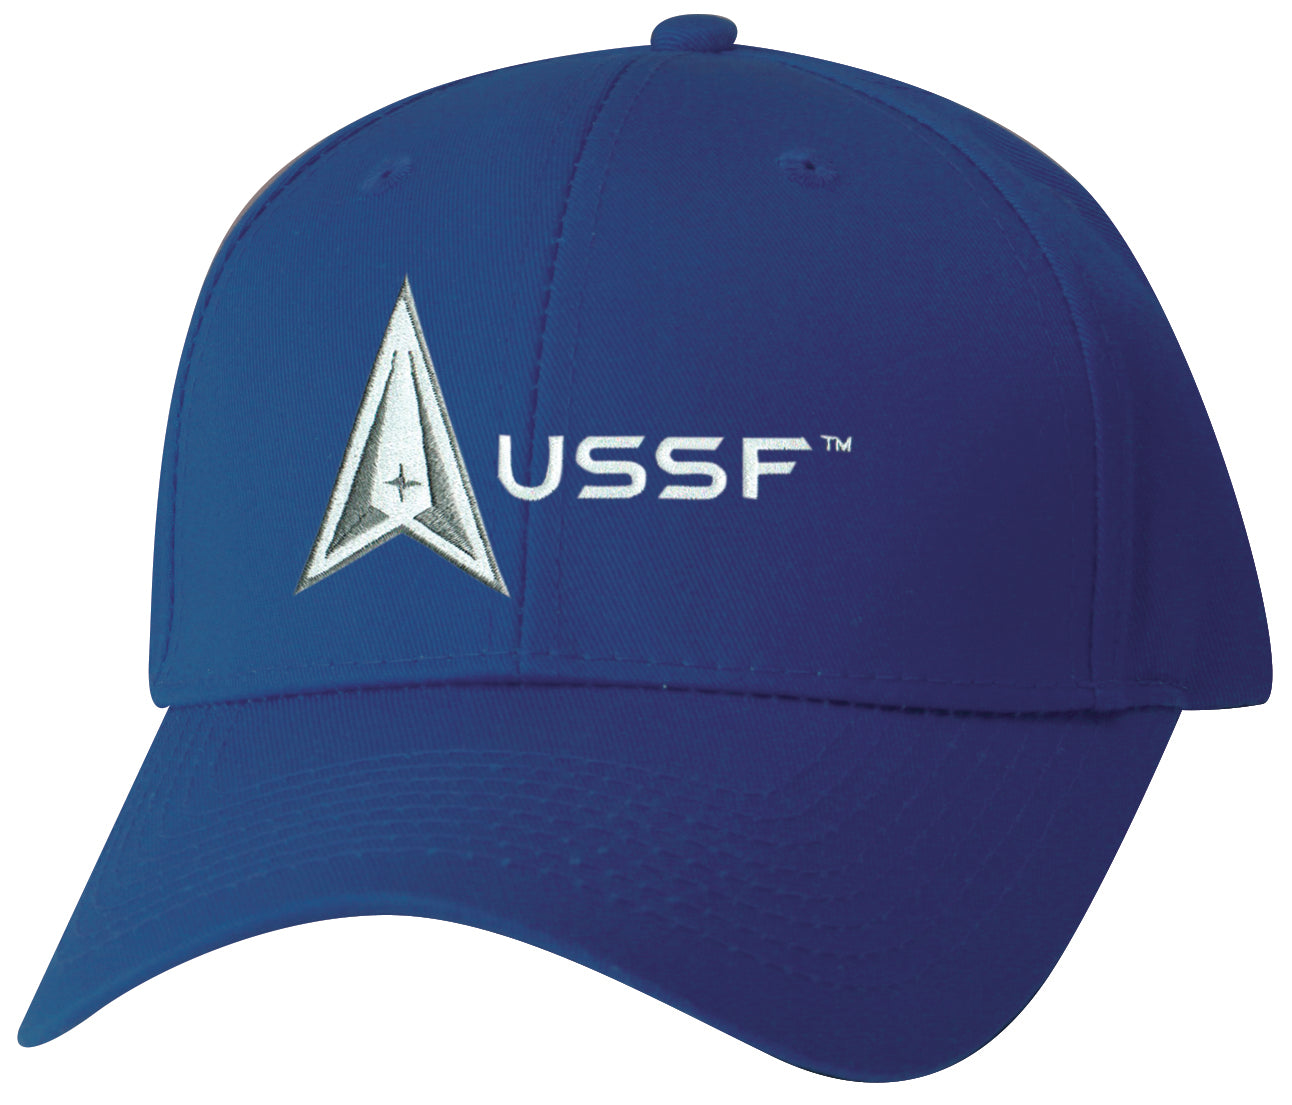 United States Space Force Logo USSF Embroidered on a Royal Structured Ball Cap